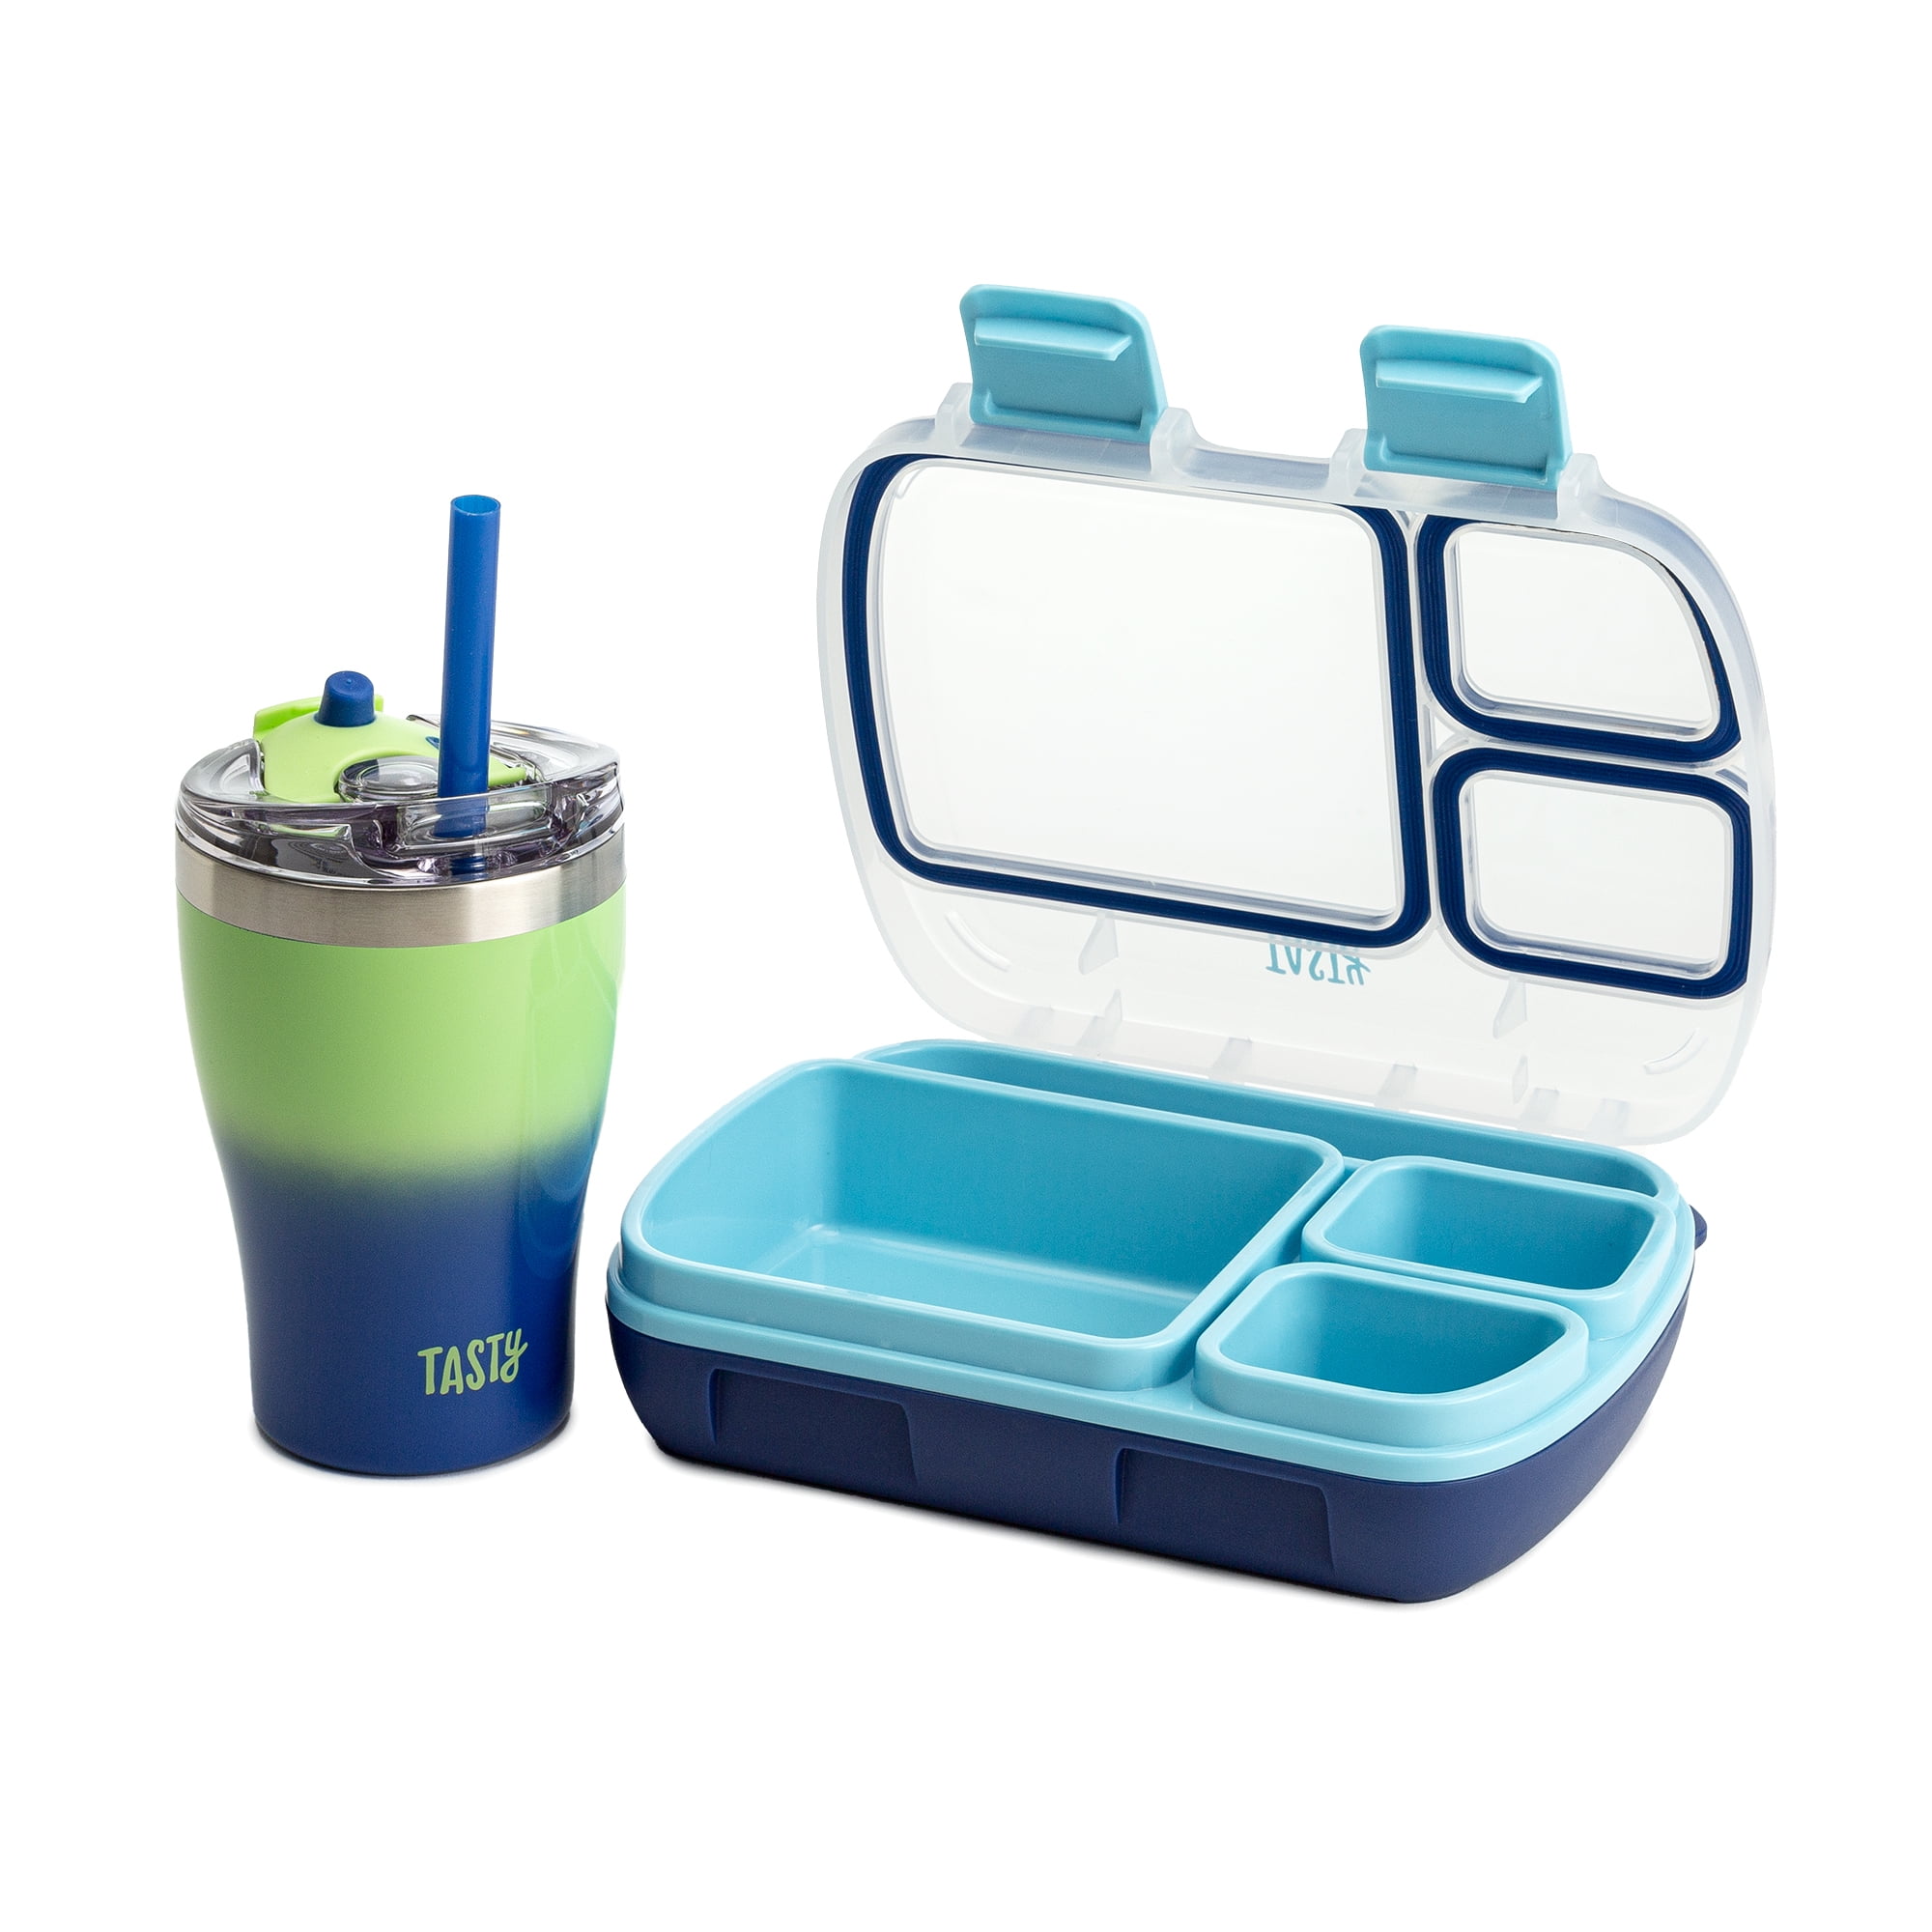 Borosil Lunch Box - Set of 2 - 13 Oz Glass Lunch Salad Containers with Soft  Insulated Lunch Bag, 100% Leakproof Locking Lids, BPA Free, Microwavable &  Dishwasher Safe, Lunch Box For